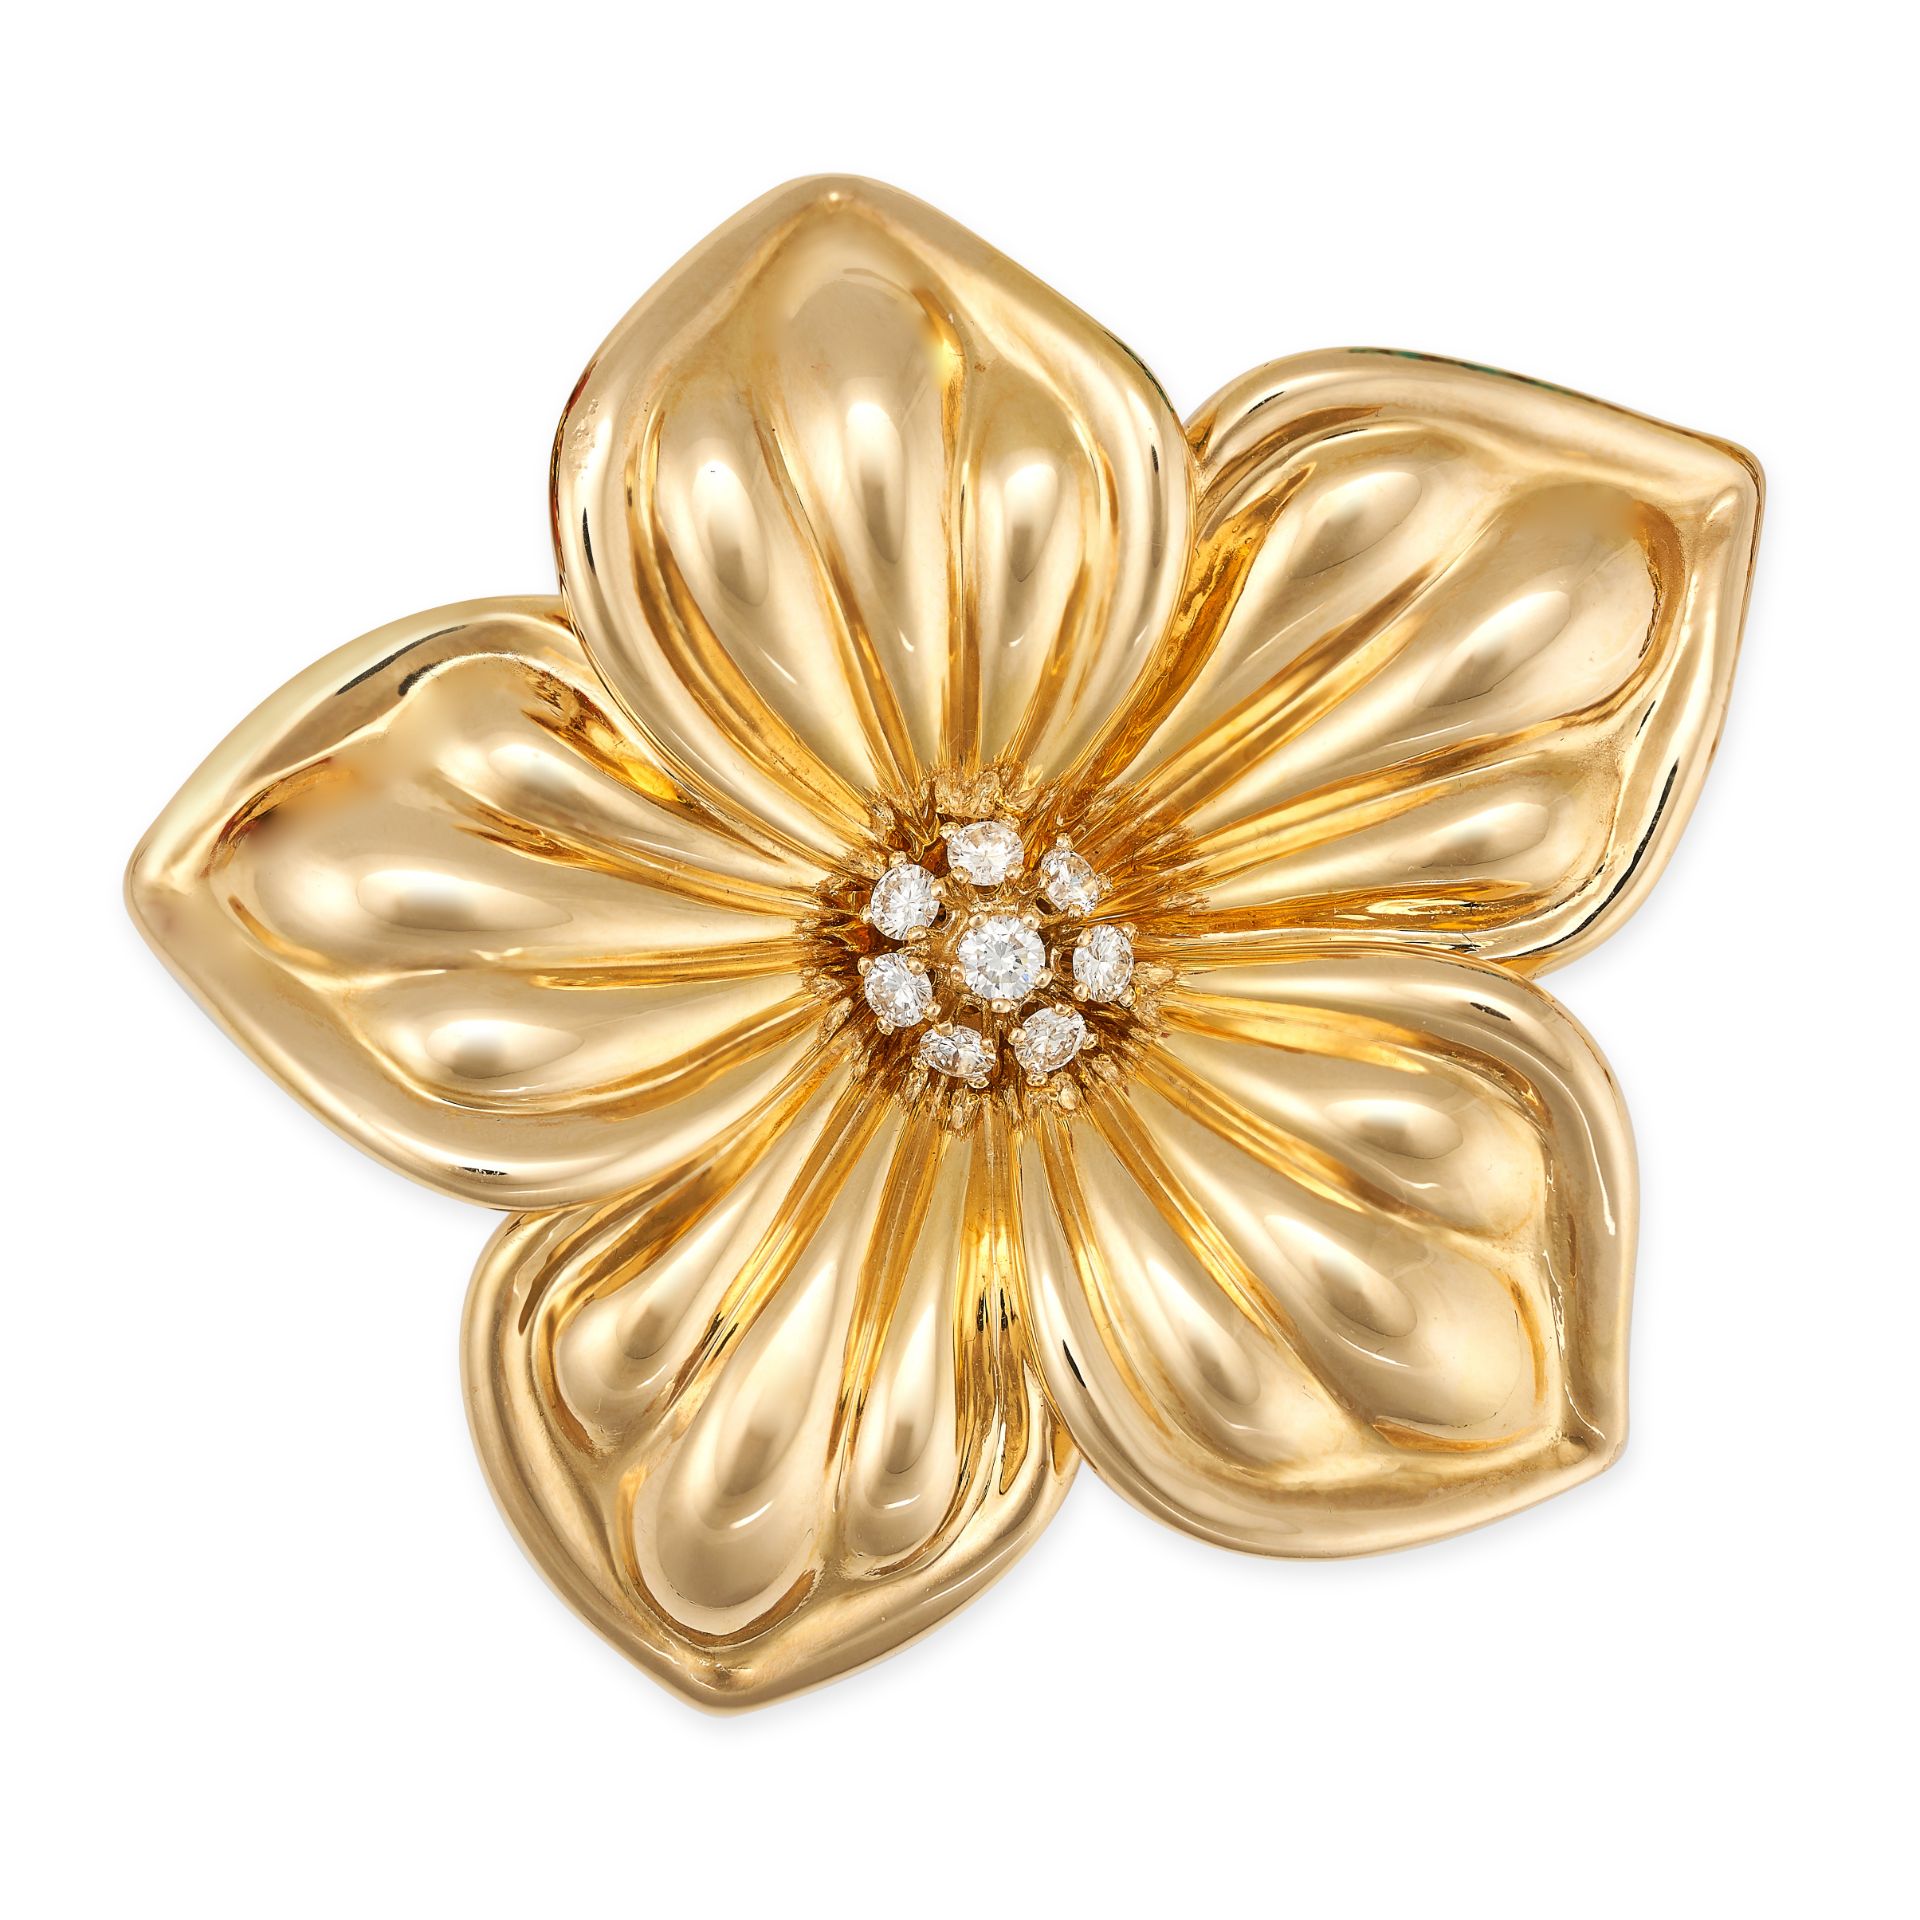 VAN CLEEF & ARPELS, A DIAMOND FLOWER BROOCH in 18ct yellow gold, designed as the head of a flower,